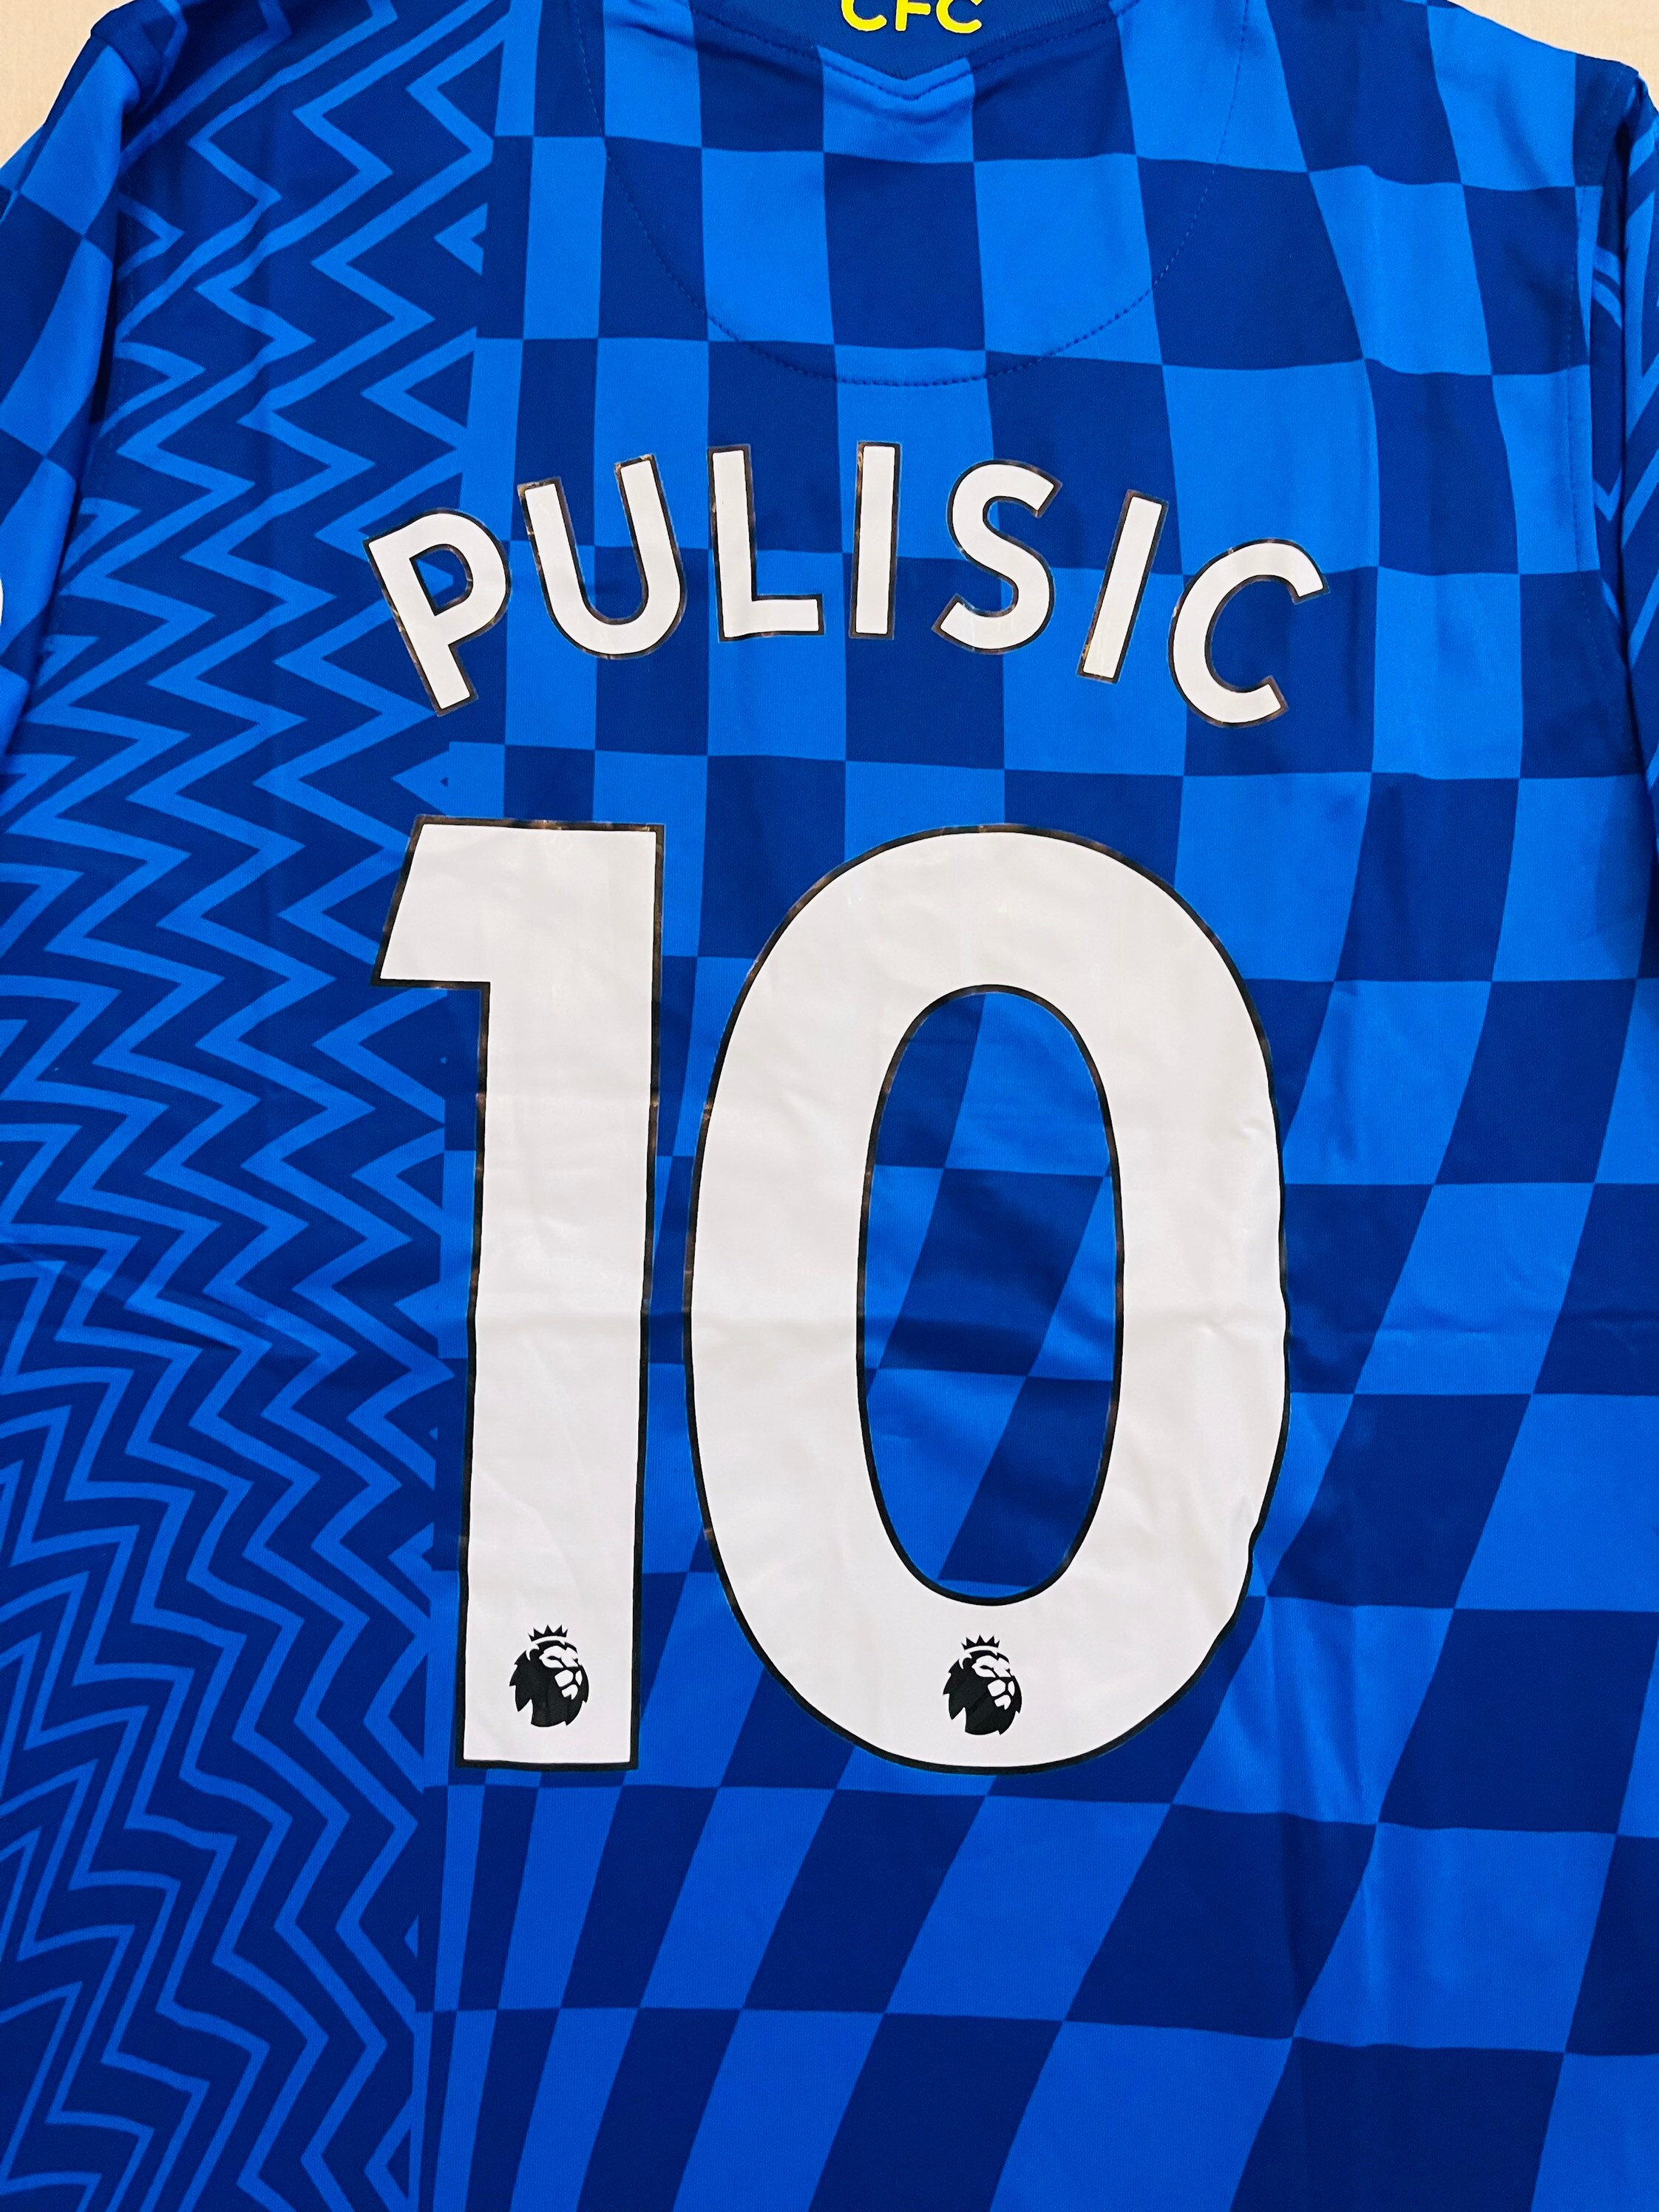 Pulisic 10 Chelsea home soccer jersey 21/22 | Etsy